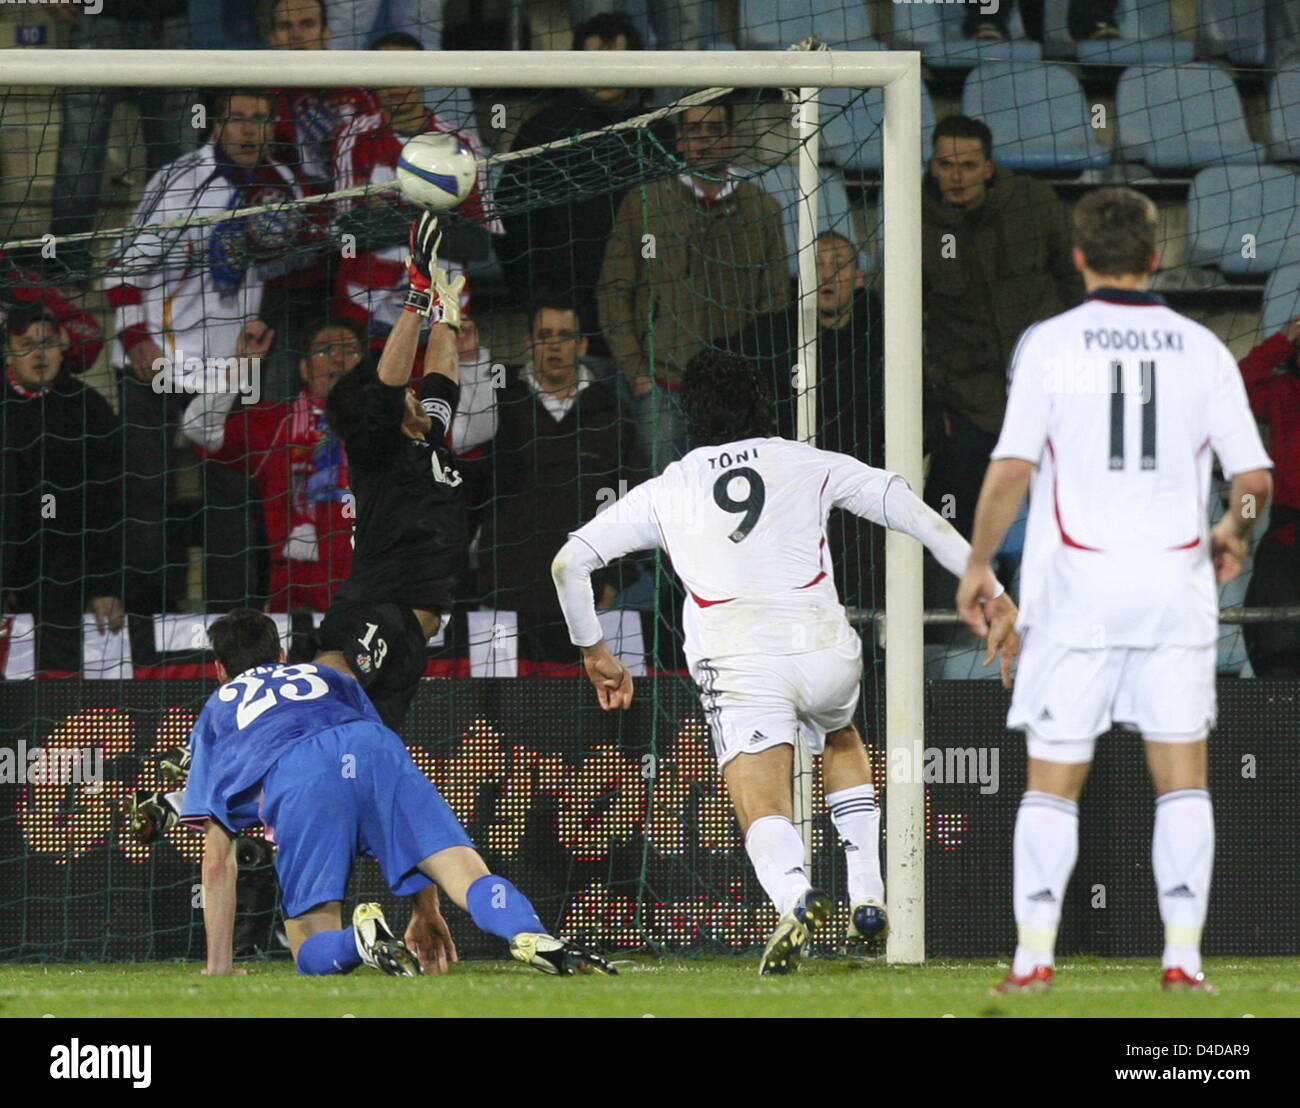 Munich's striker Luca Toni (2nd from R) scores the 3-3 in the overtime during second leg UEFA Cup quarter finals soccer match Getafe CF vs. Bayern Munich at Coliseum Alfonso Perez stadium, in Getafe, Spain, 10 April 2008. The match ended 3-3. Munich adavances to the semi finals because they scored more away goals. Photo: Matthias Schrader Stock Photo